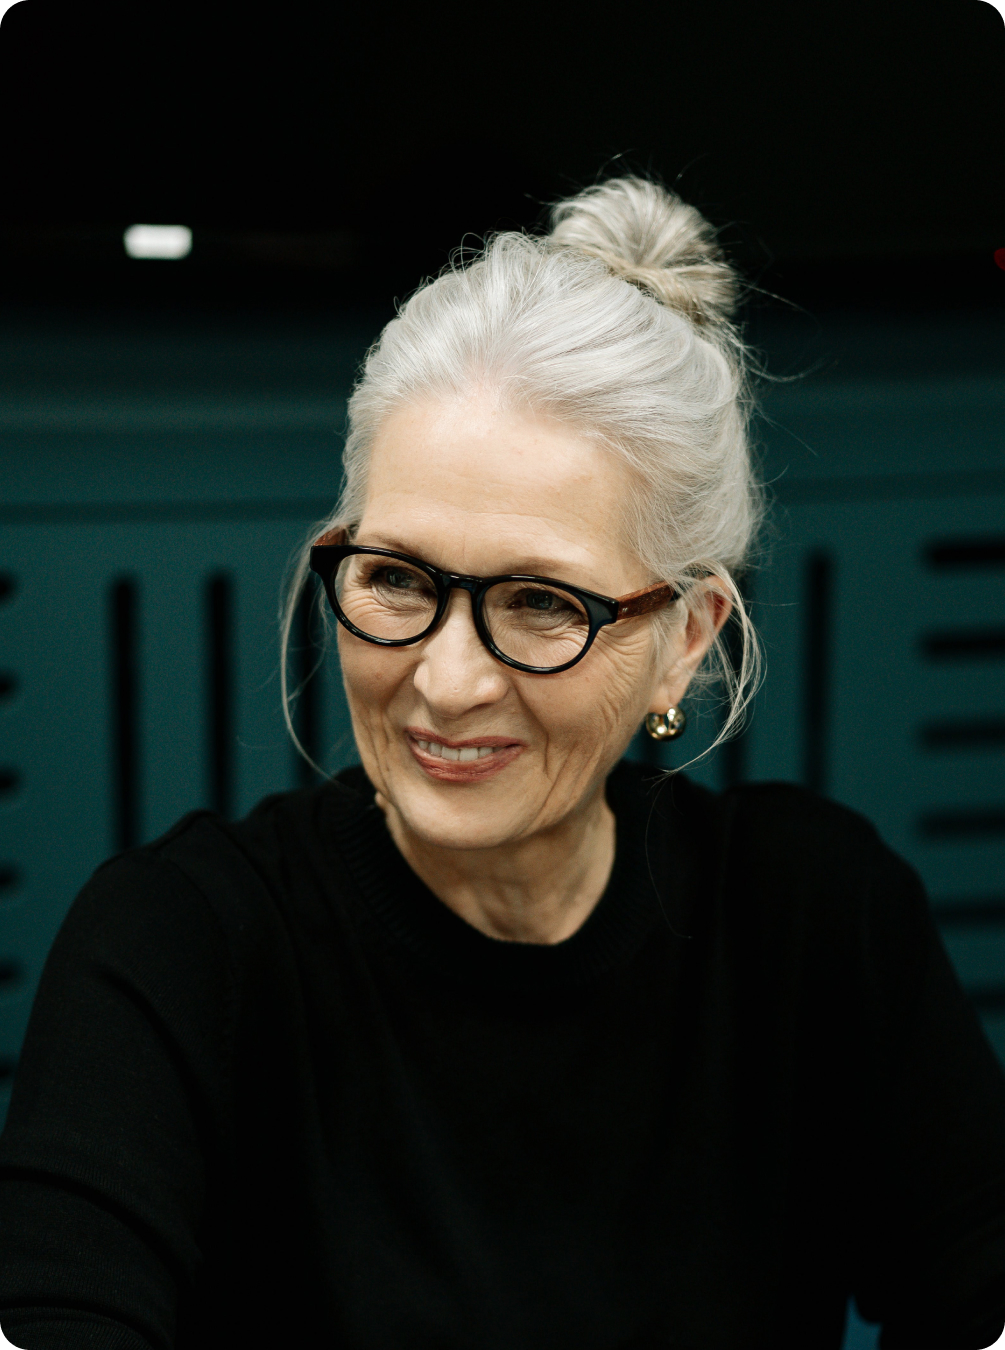 A person with gray hair tied up in a top knot wearing a black top in an office.